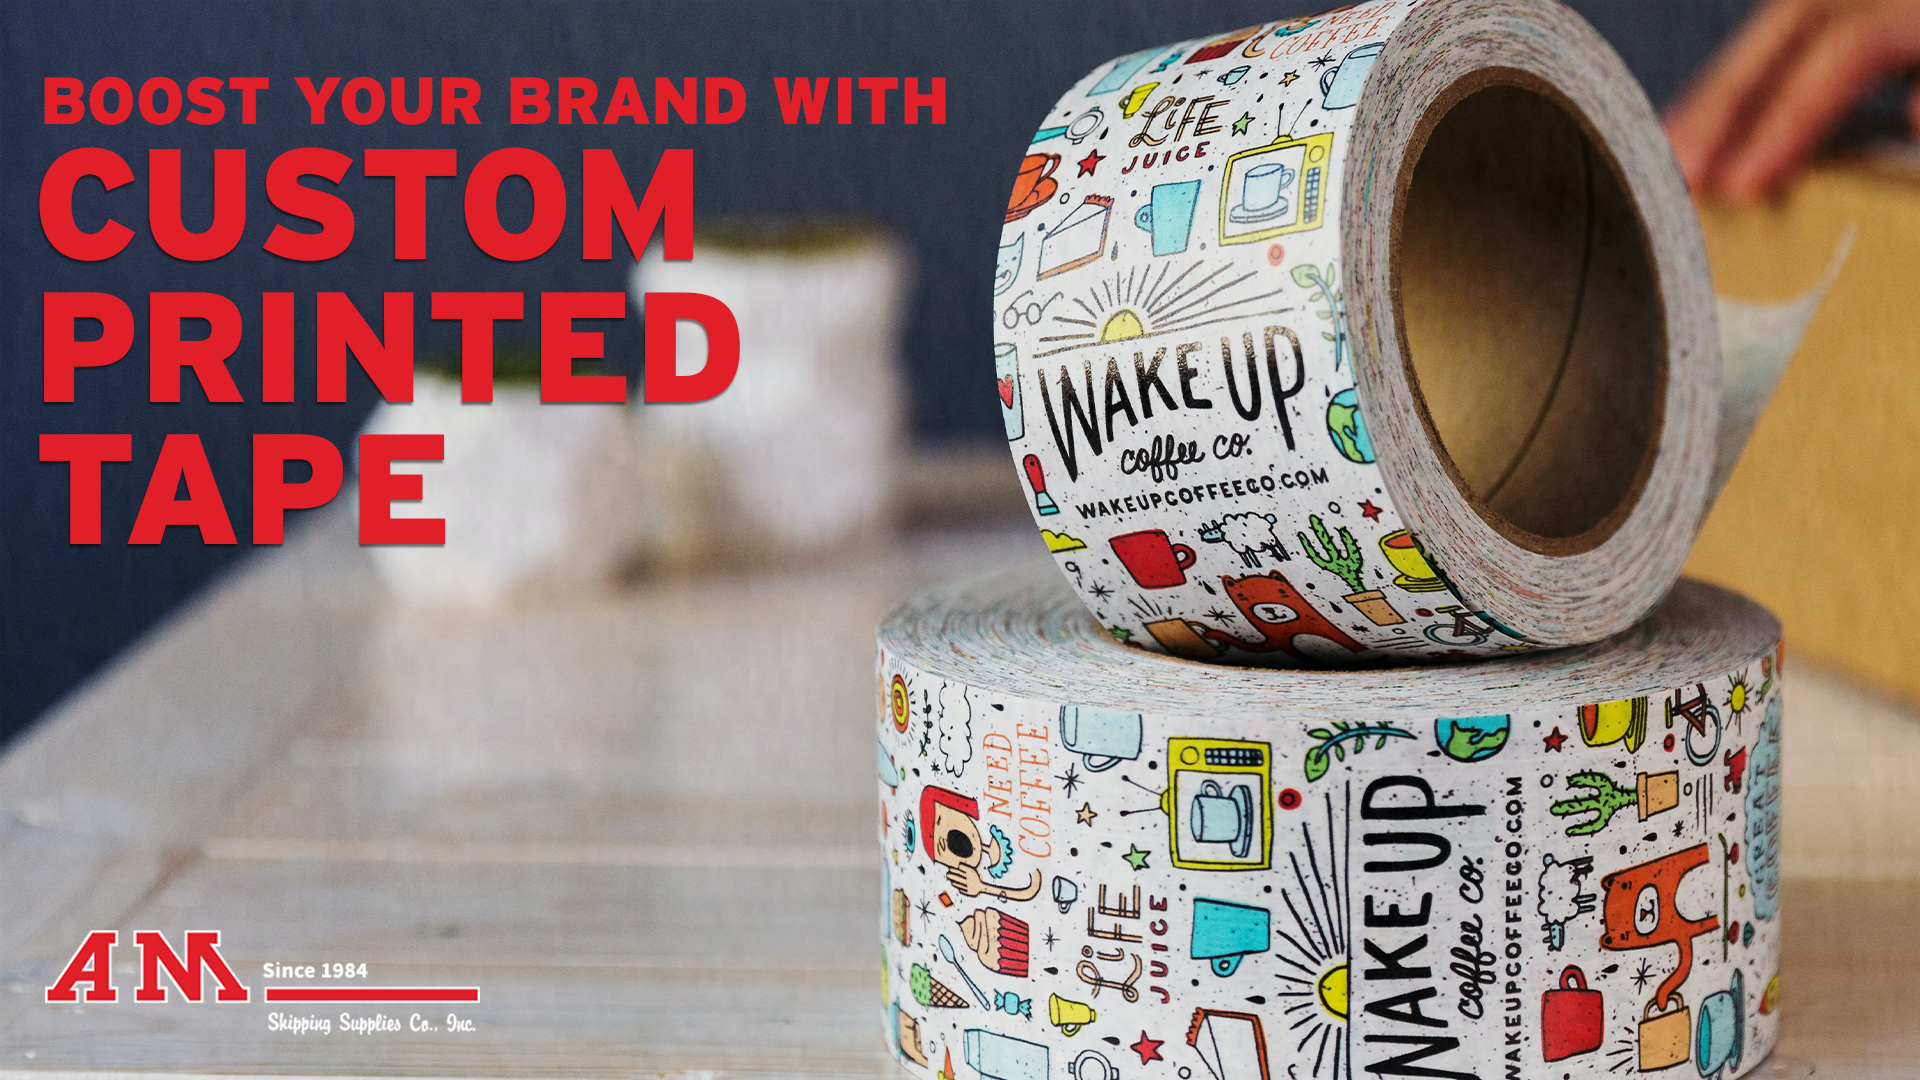 Boost Your Brand with Custom Printed Tape